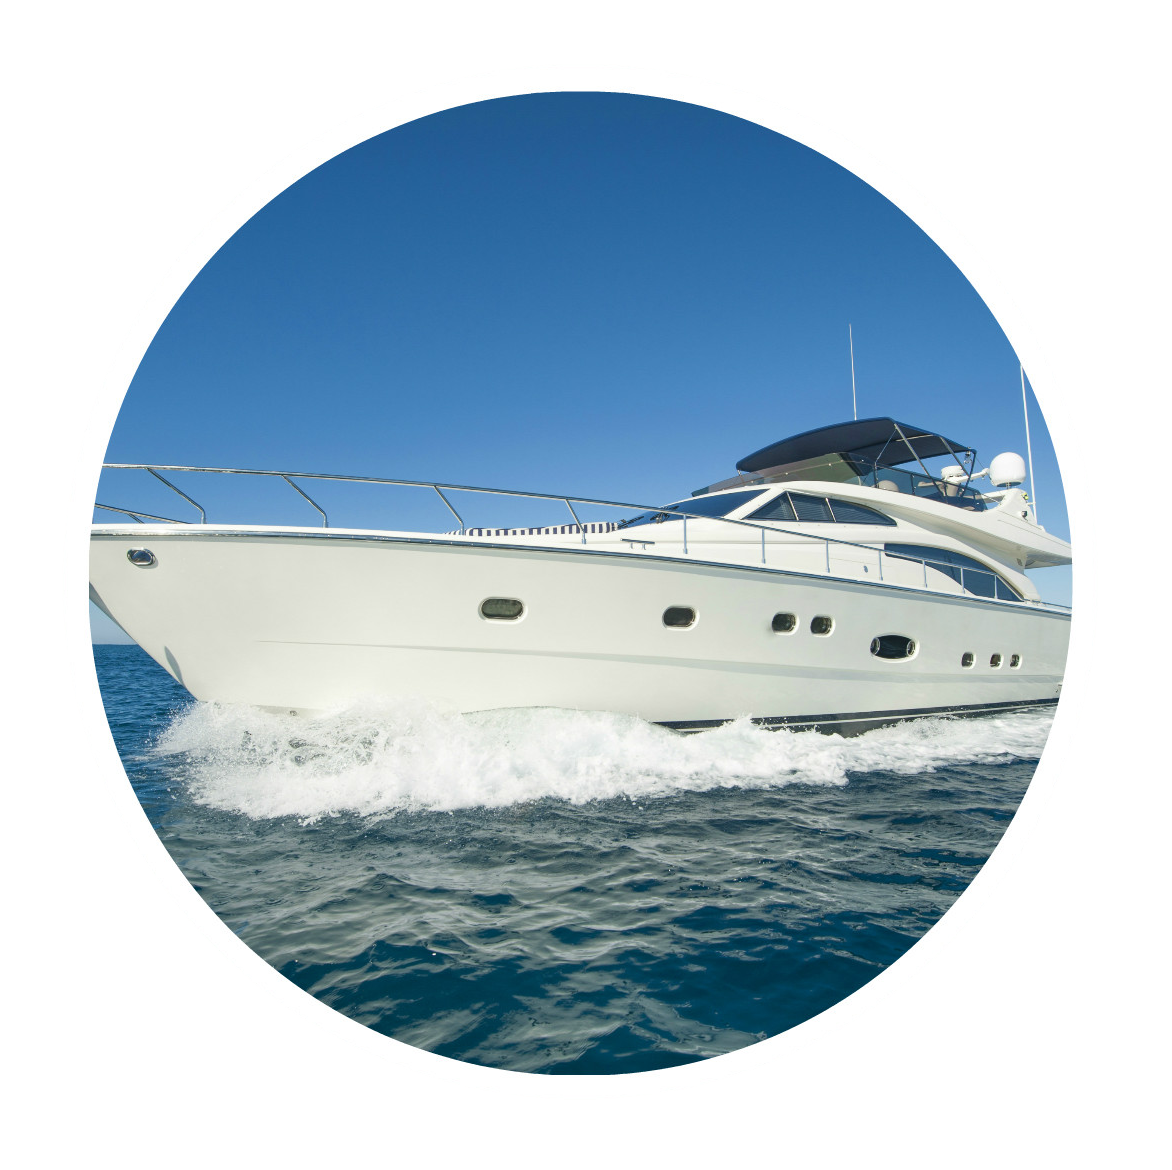 yacht insurance for older boats